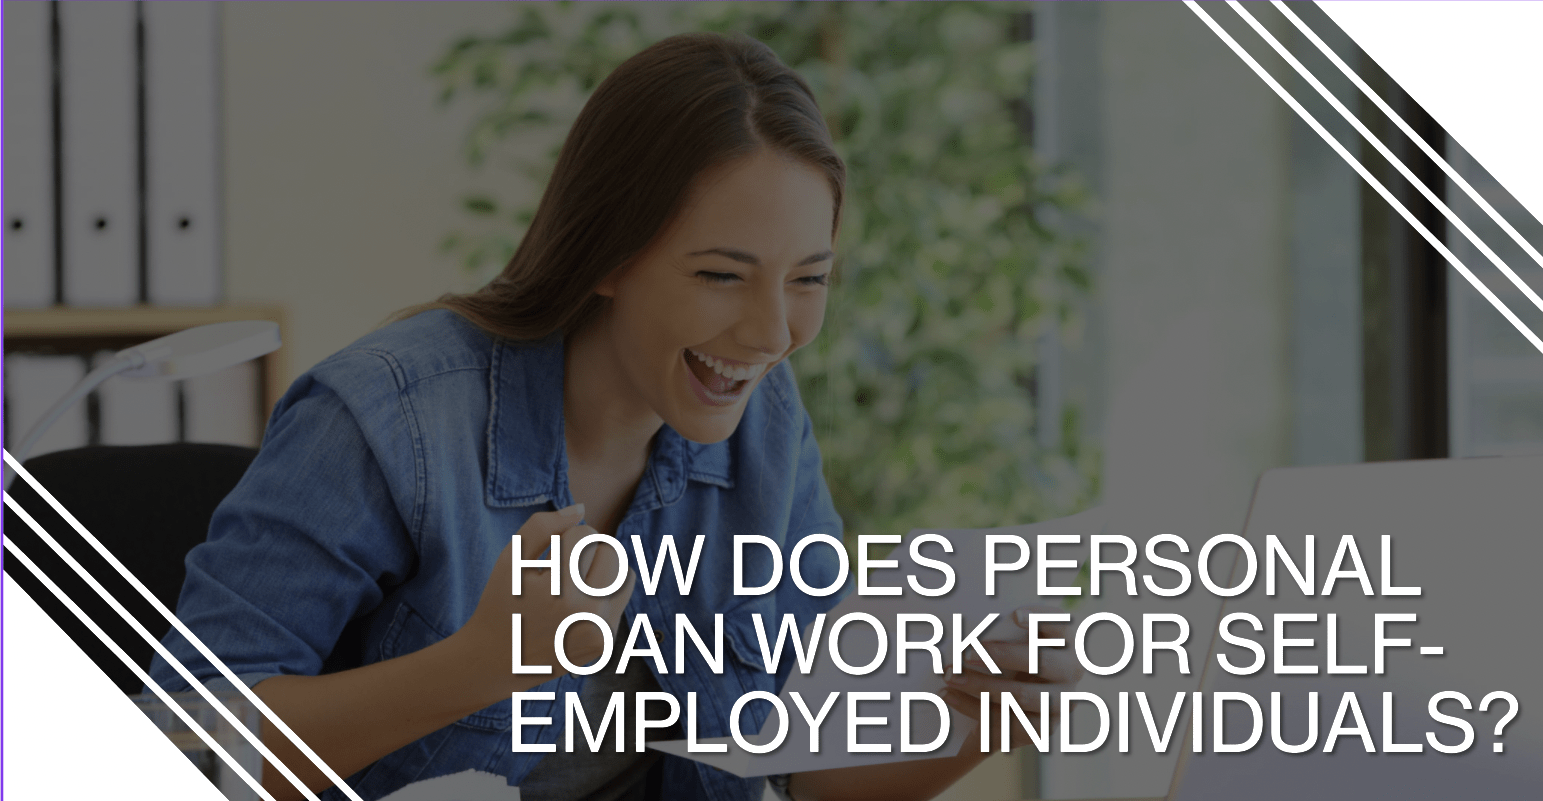 Personal Loan for Self-Employed